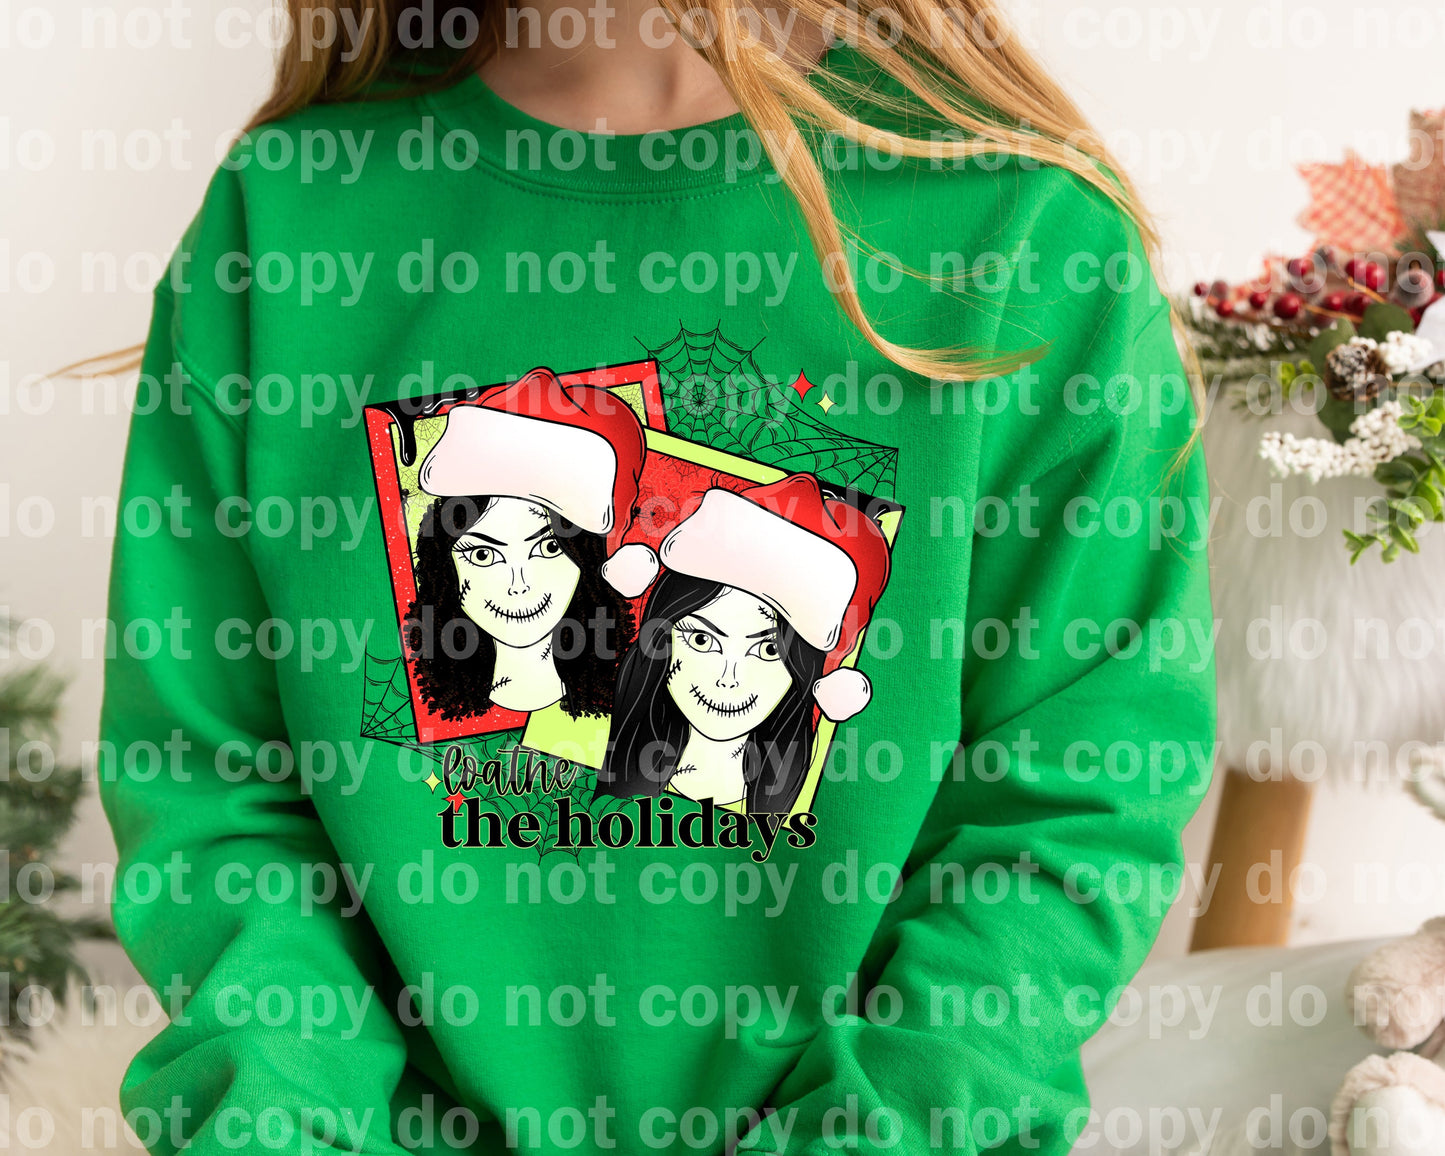 Loathe The Holidays Polaroid Curly Wave Hair Duo with Optional Two Rows Sleeve Designs Dream Print or Sublimation Print